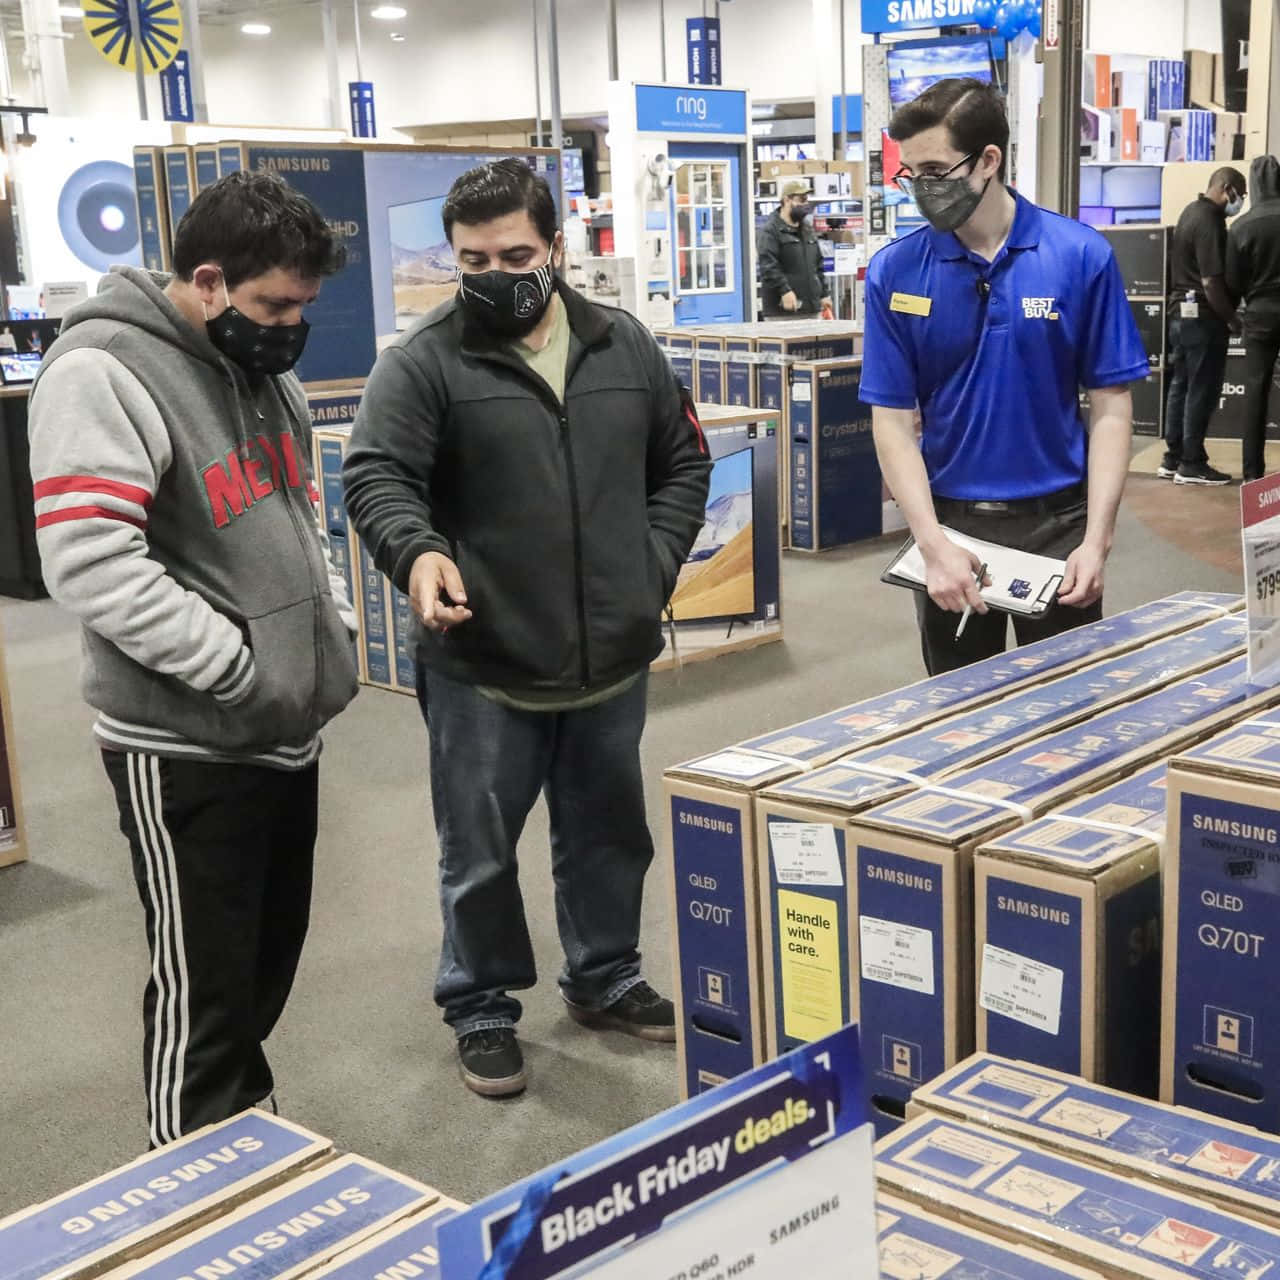 A Group Of People Looking At Boxes In A Store